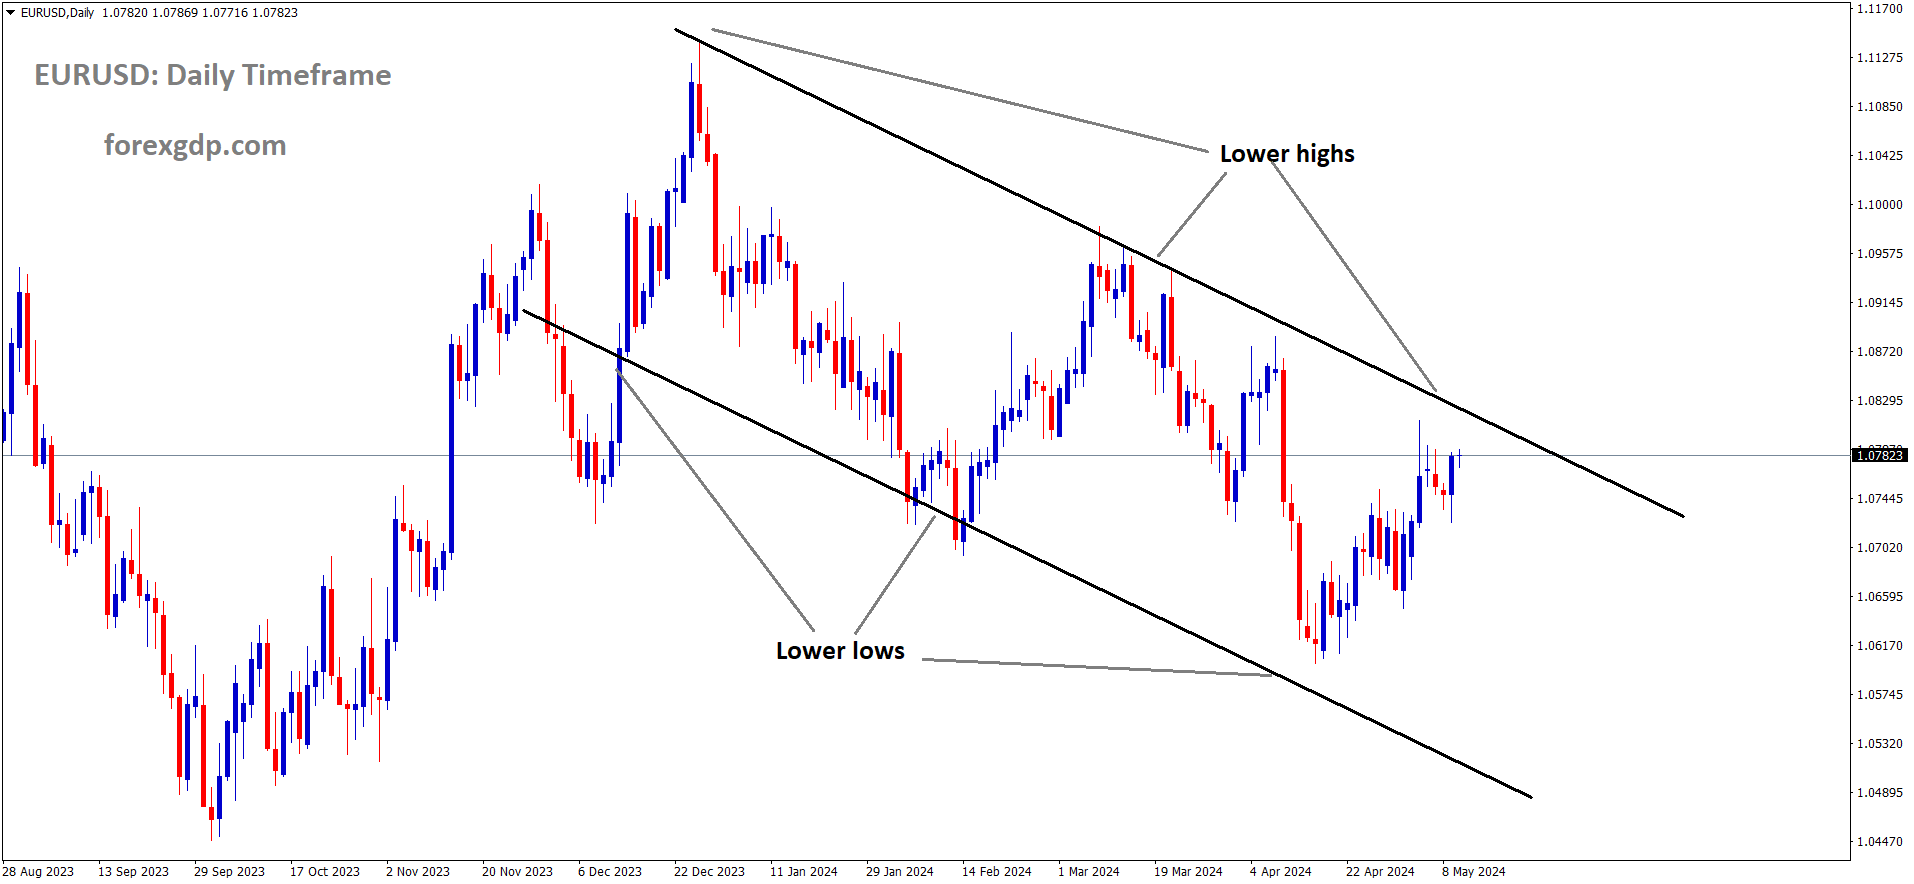 EURUSD is moving in the Descending channel and the market has reached lower high area of the channel